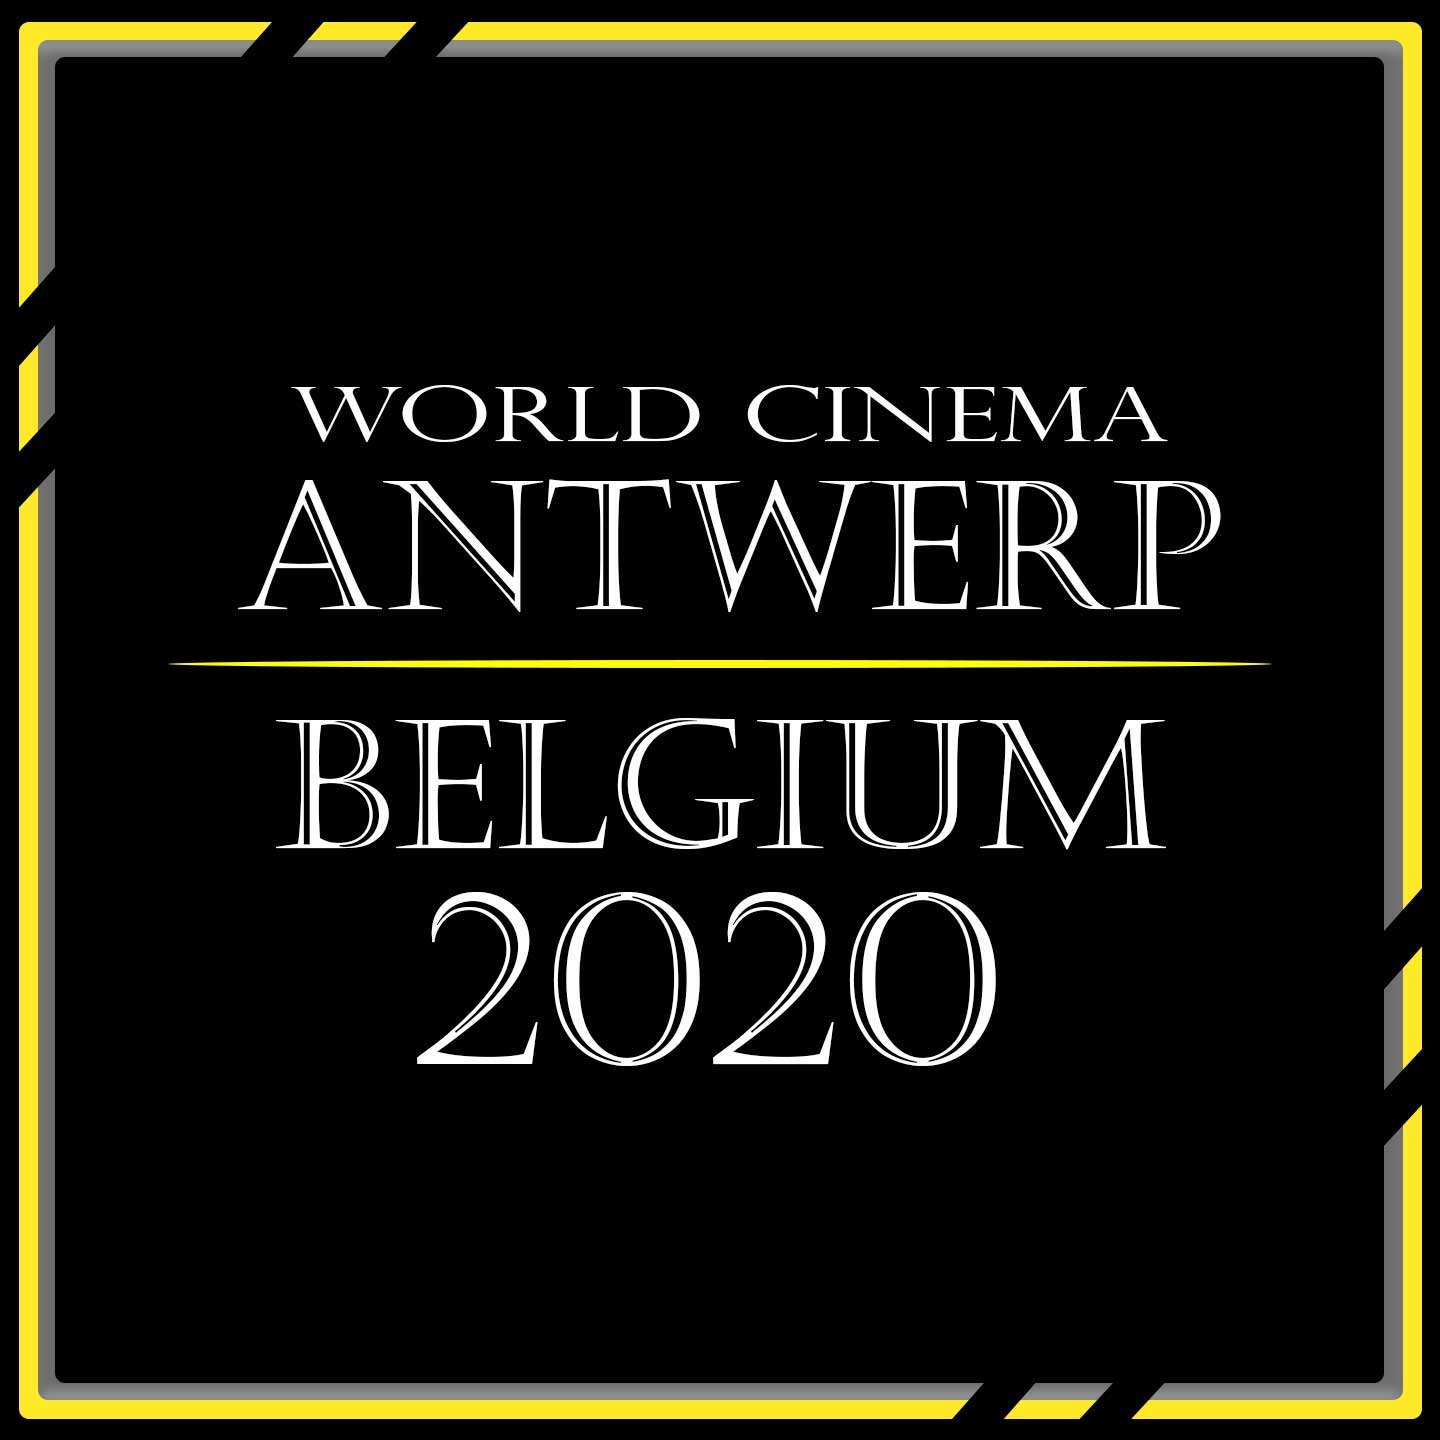 We've compiled everything you need to know about the World Cinema Antwerp film festival and their submission dates.